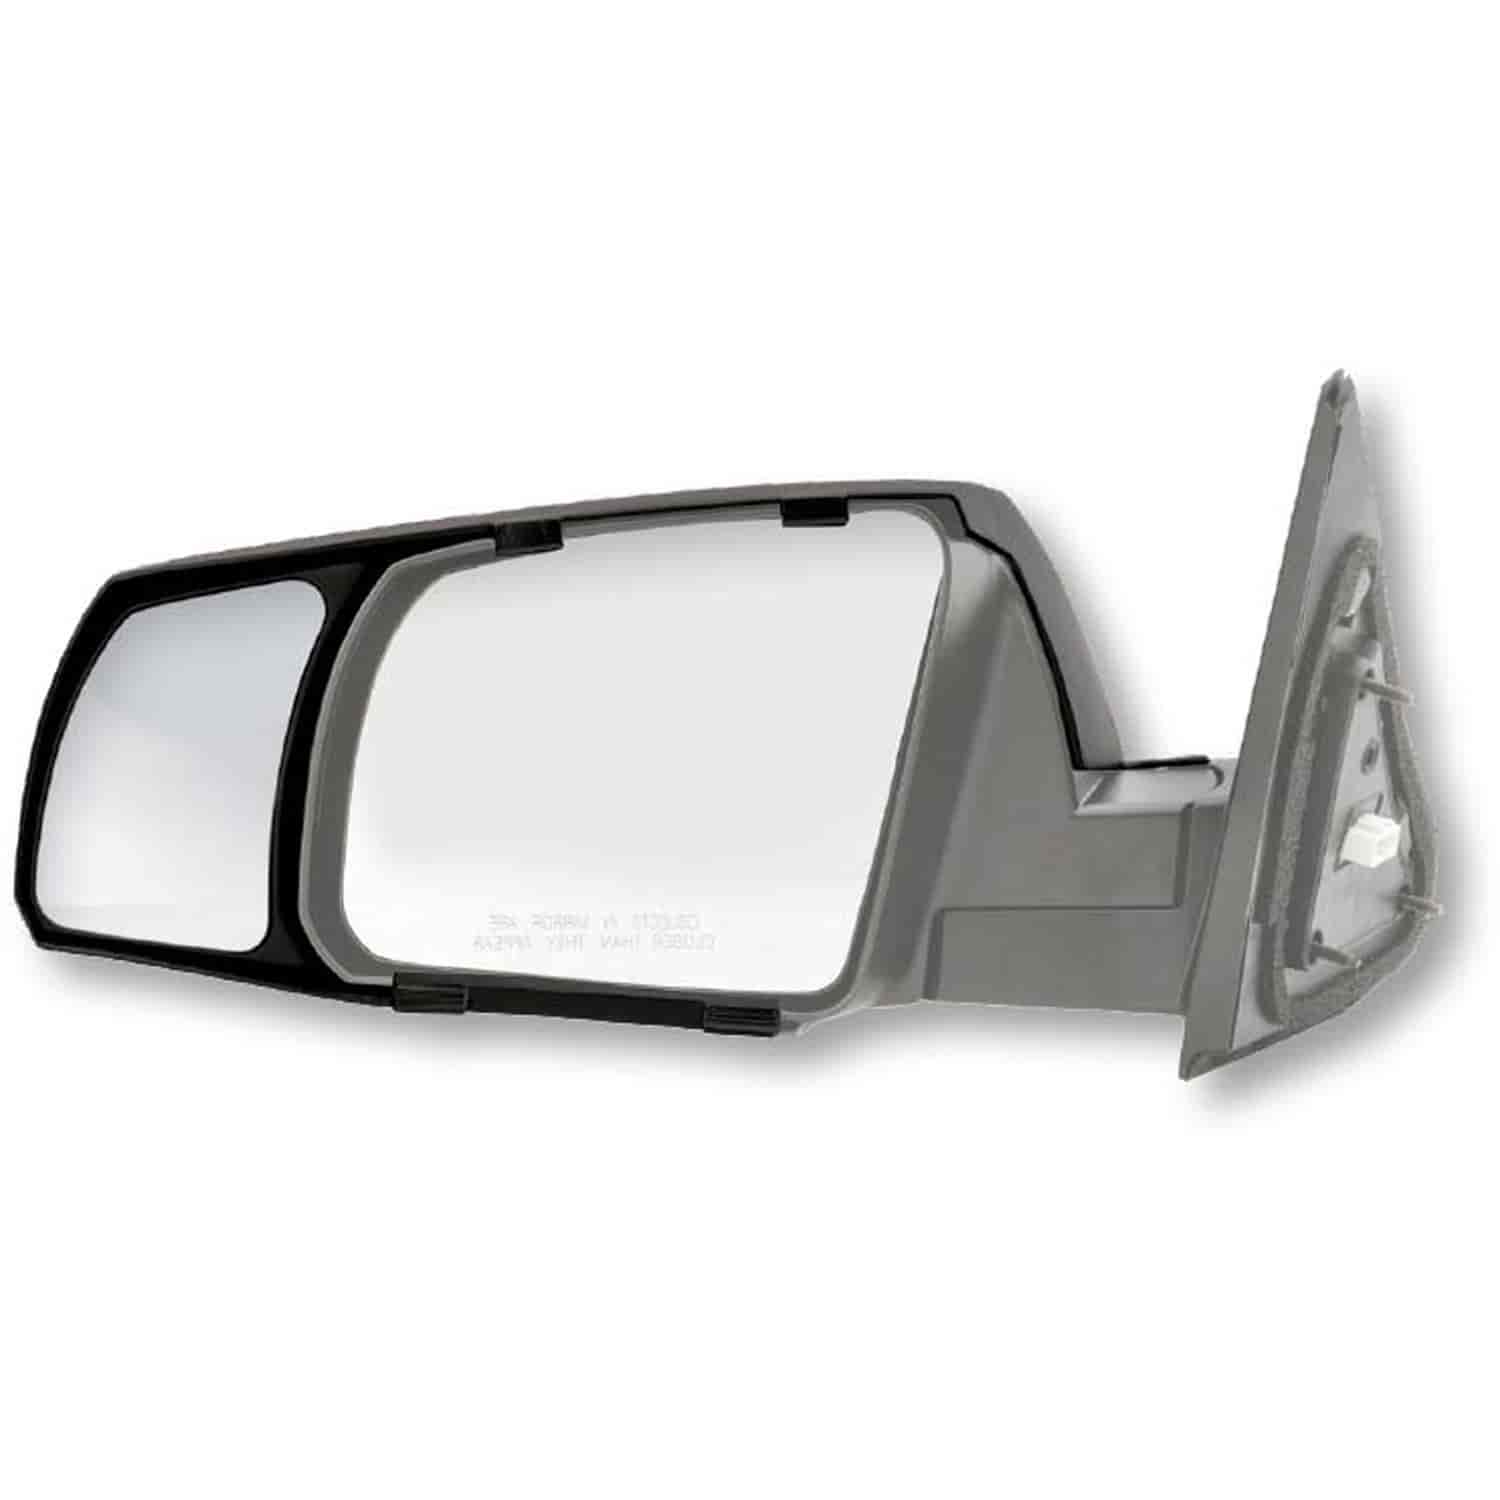 Snap-On Towing Mirrors Fits 2007 to 2014 Toyota Tundra